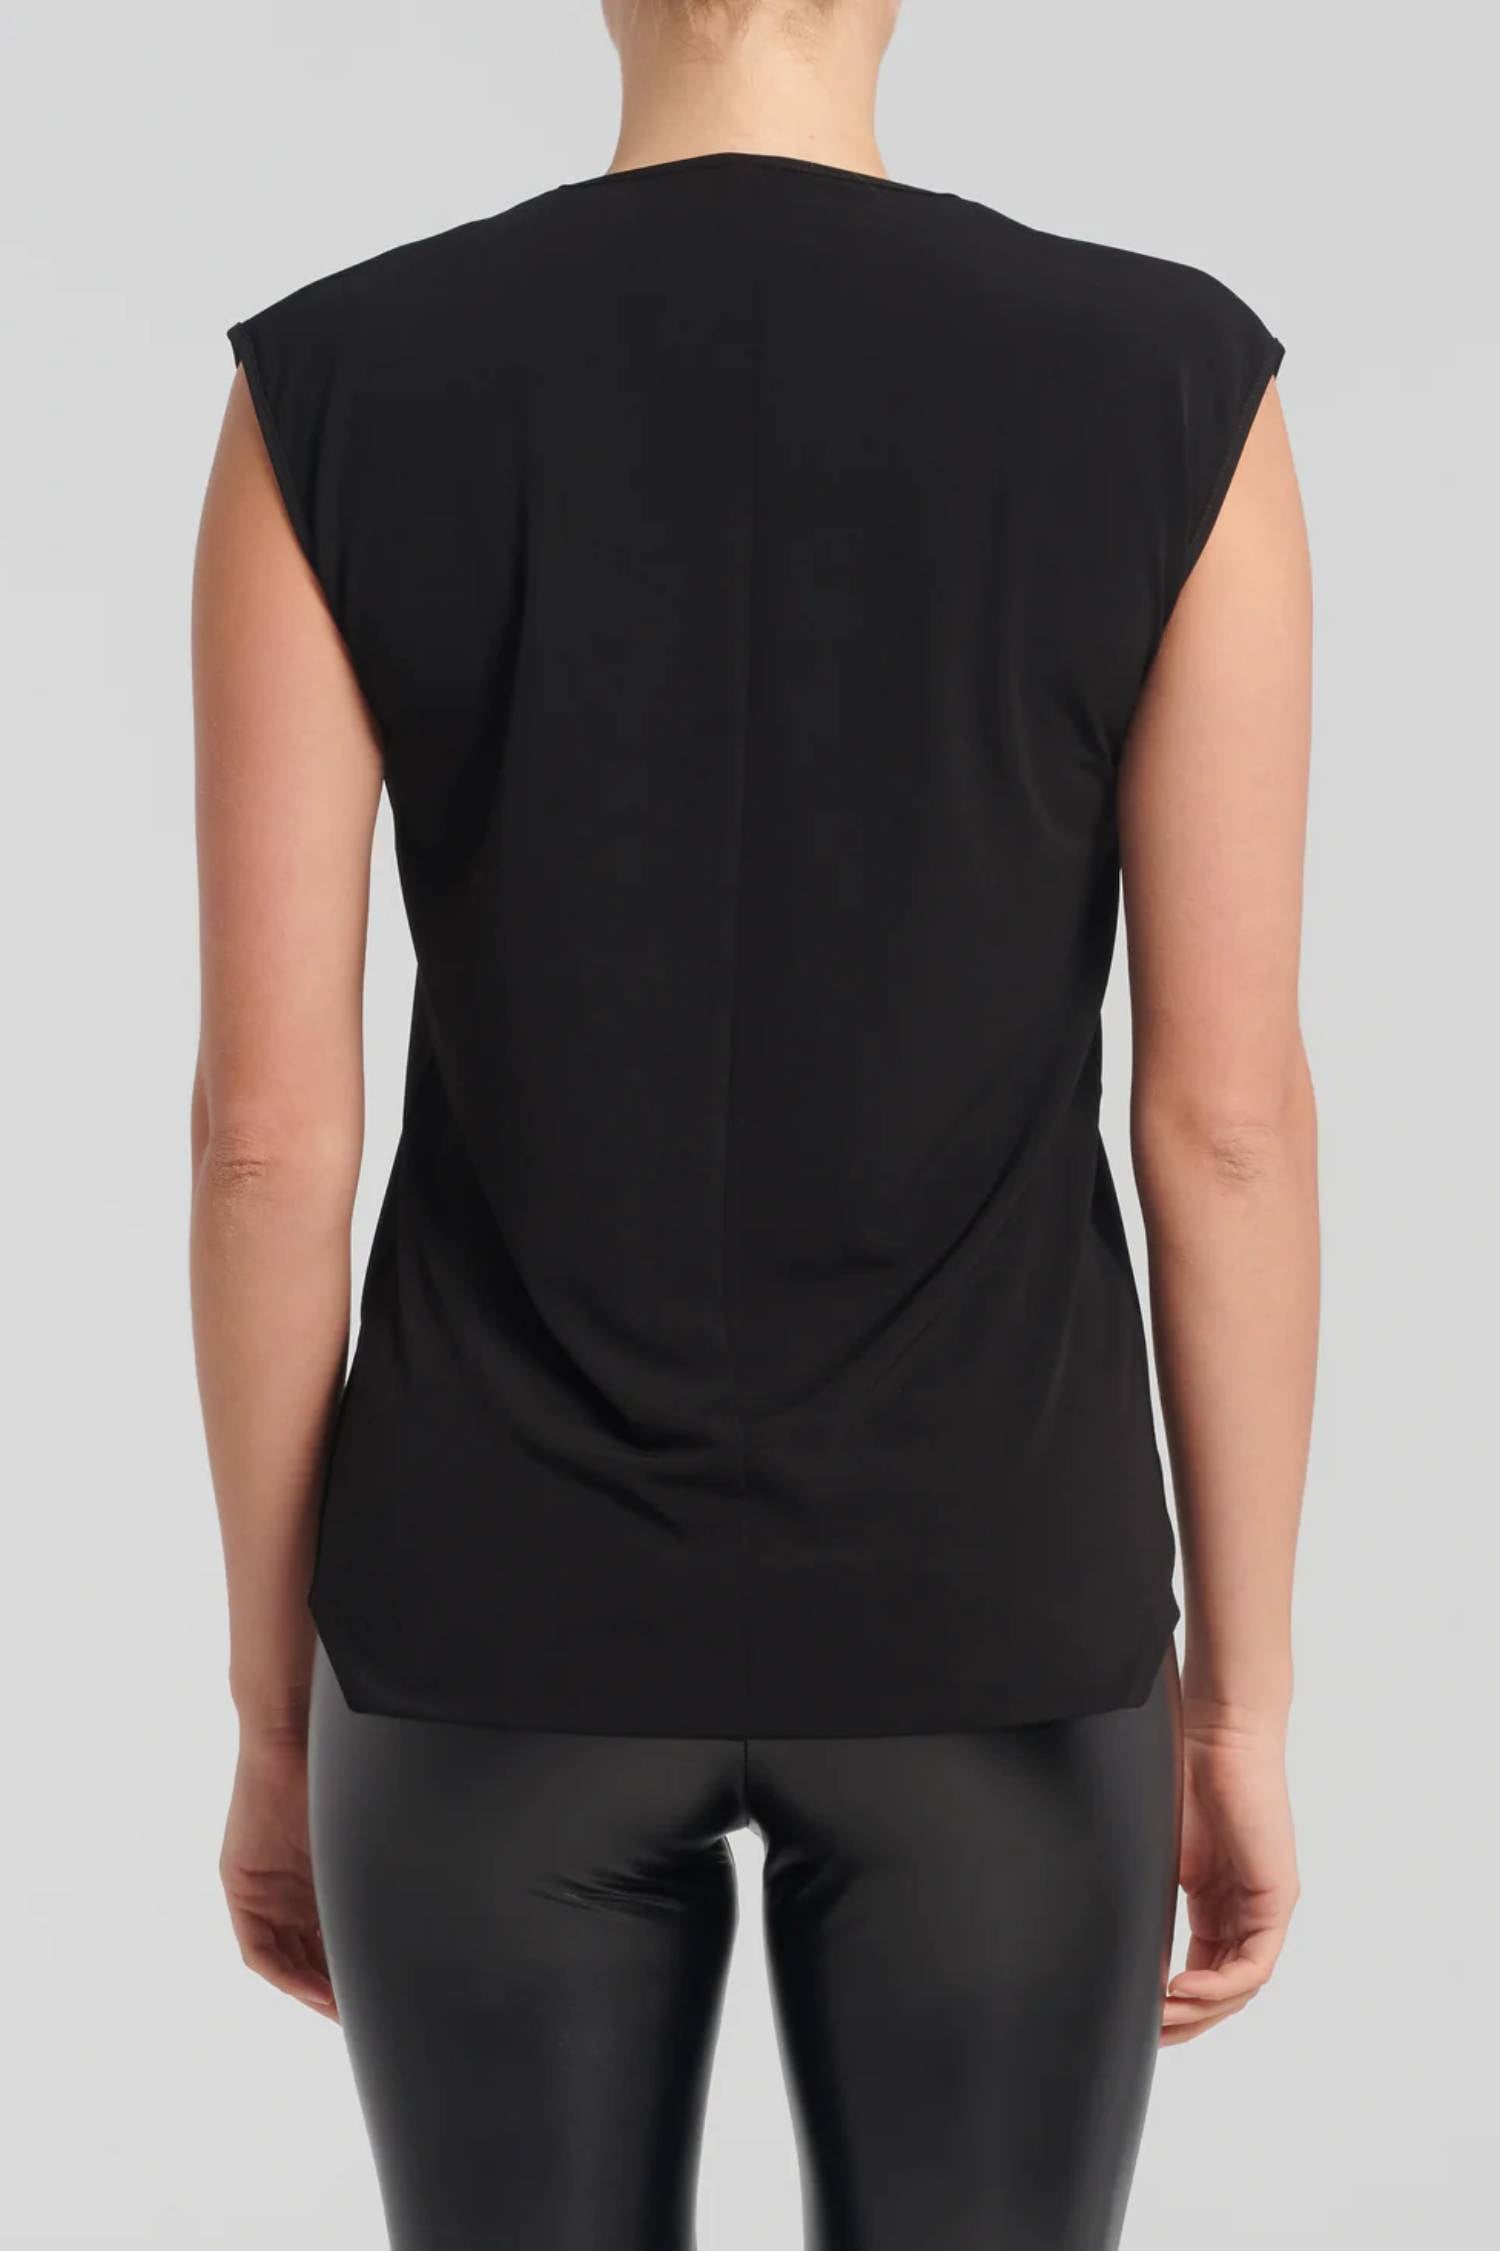 Salvio Top by Kollontai, Black, back view, sleeveless, V-neck, slightly loose fit, hip length, sizes XS to XXL, made in Montreal 